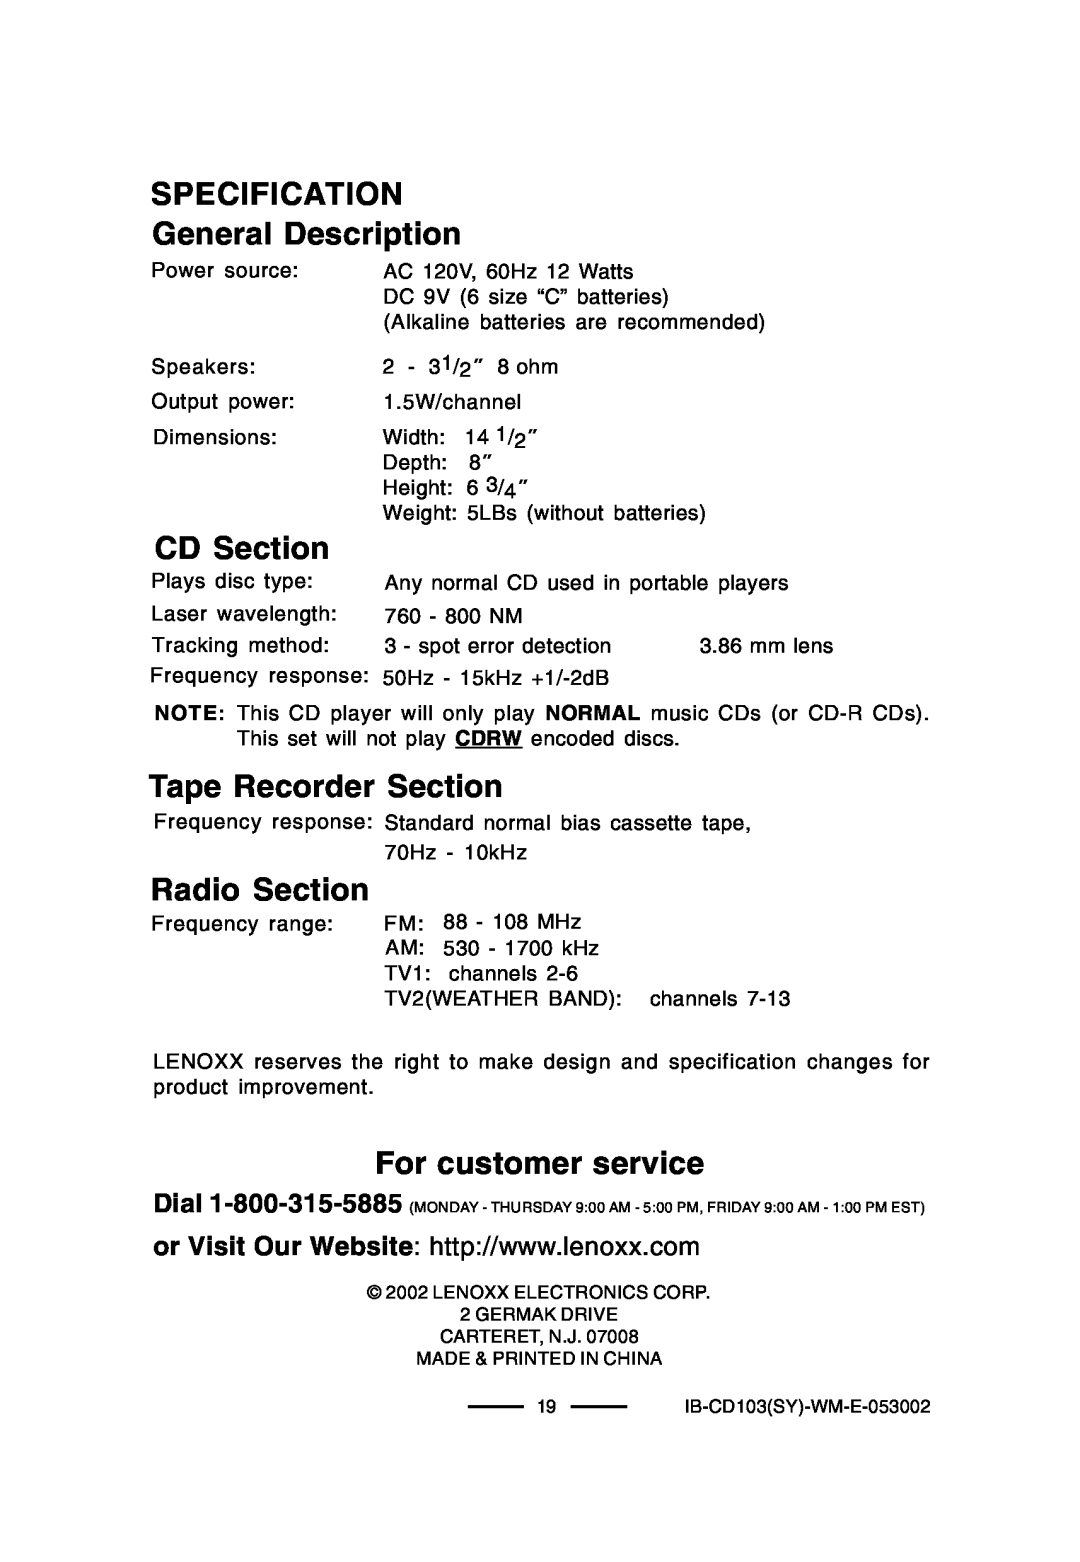 Lenoxx Electronics CD-103, BP-103 SPECIFICATION General Description, CD Section, Tape Recorder Section, Radio Section 